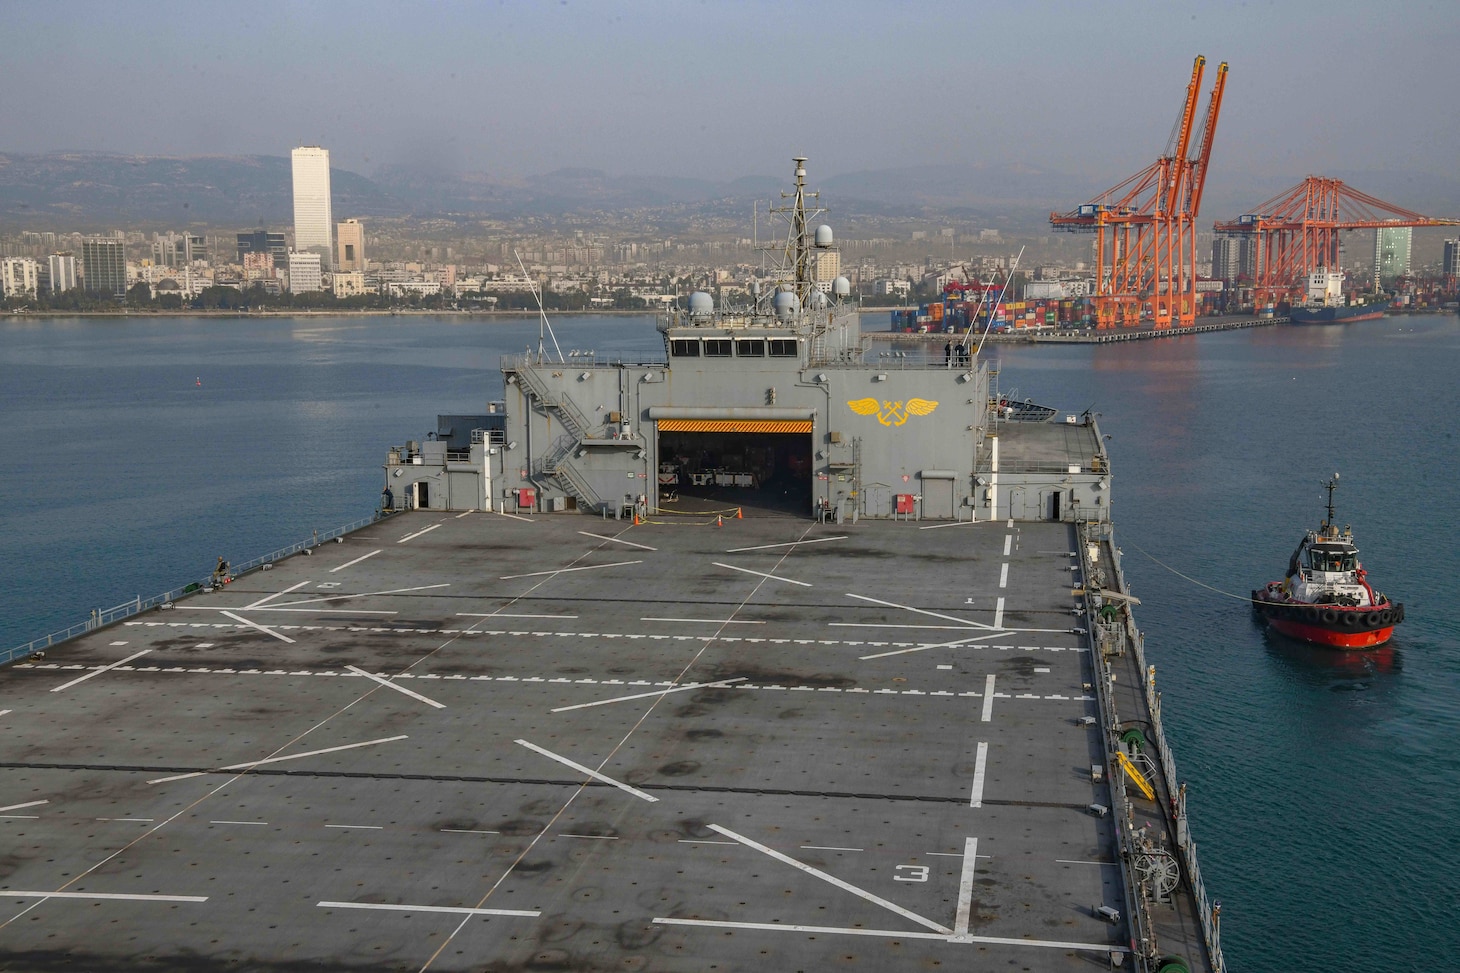 (Feb. 28, 2023) The USS Hershel "Woody" Williams (ESB 4) arrived in Mersin, Türkiye to deliver relief supplies to Turkish authorities for those affected by the earthquakes, Feb. 28, 2023.  At the request of the Turkish government, the Hershel “Woody” Williams is one of several U.S. military units, operating under U.S. Sixth Fleet, U.S. Naval Forces Europe (NAVEUR), and U.S. European Command as part of the Turkish earthquake relief efforts.